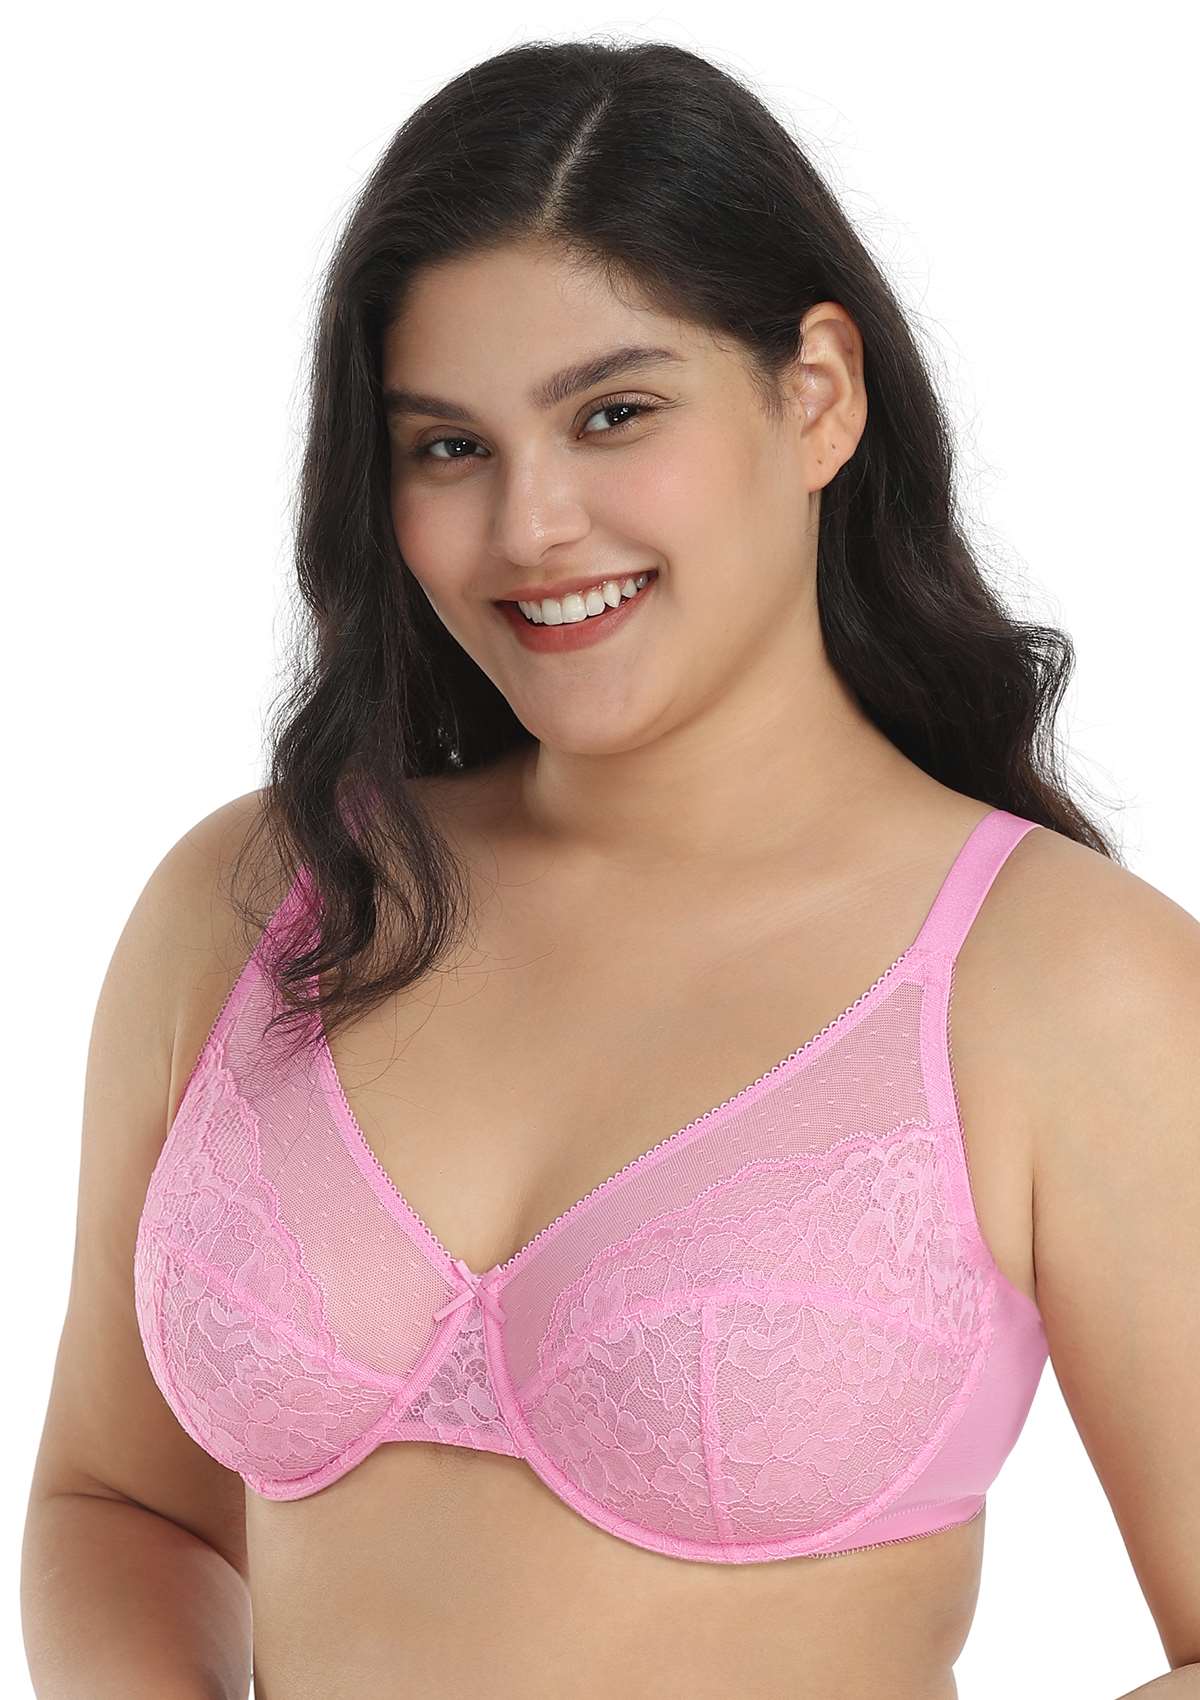 HSIA Enchante Lacy Bra: Comfy Sheer Lace Bra With Lift - Dusty Peach / 34 / D